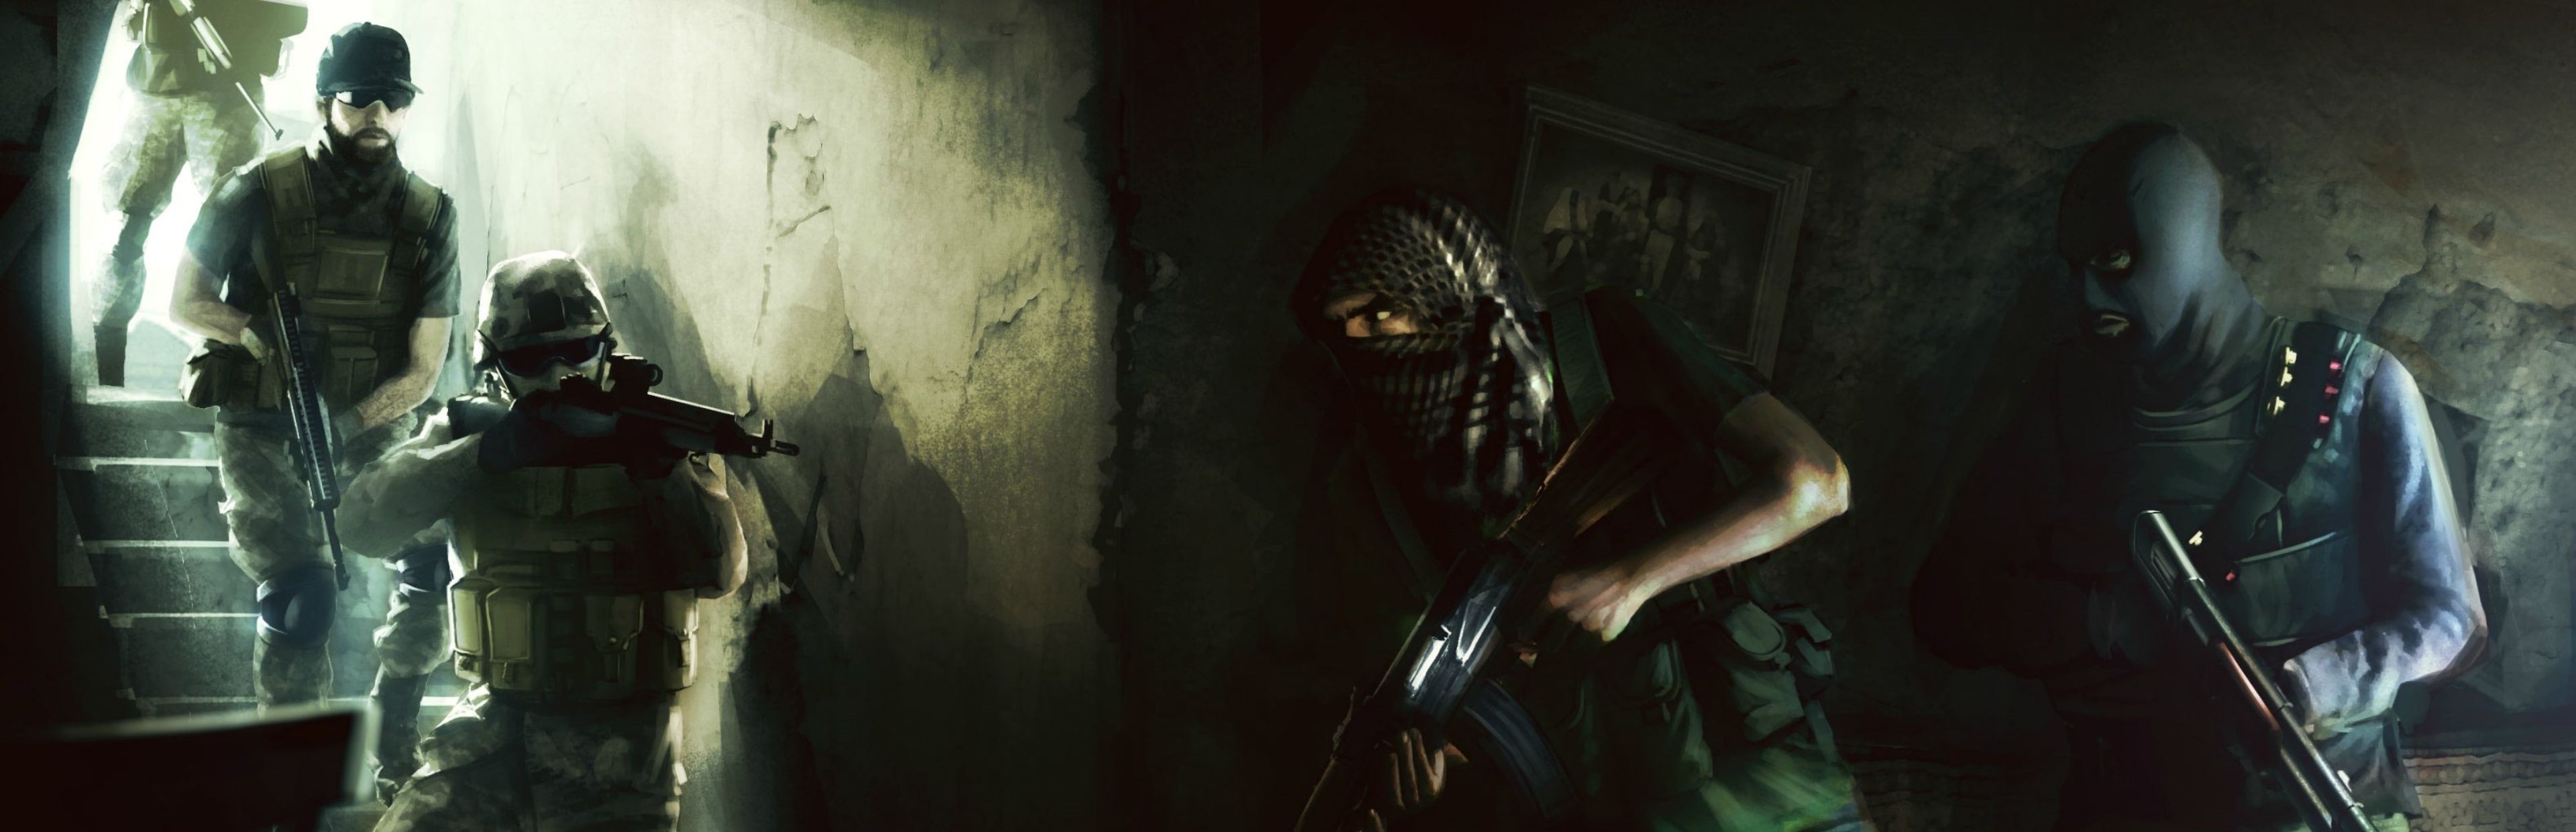 Insurgency Review: The Best Tactical Shooter on the Market?